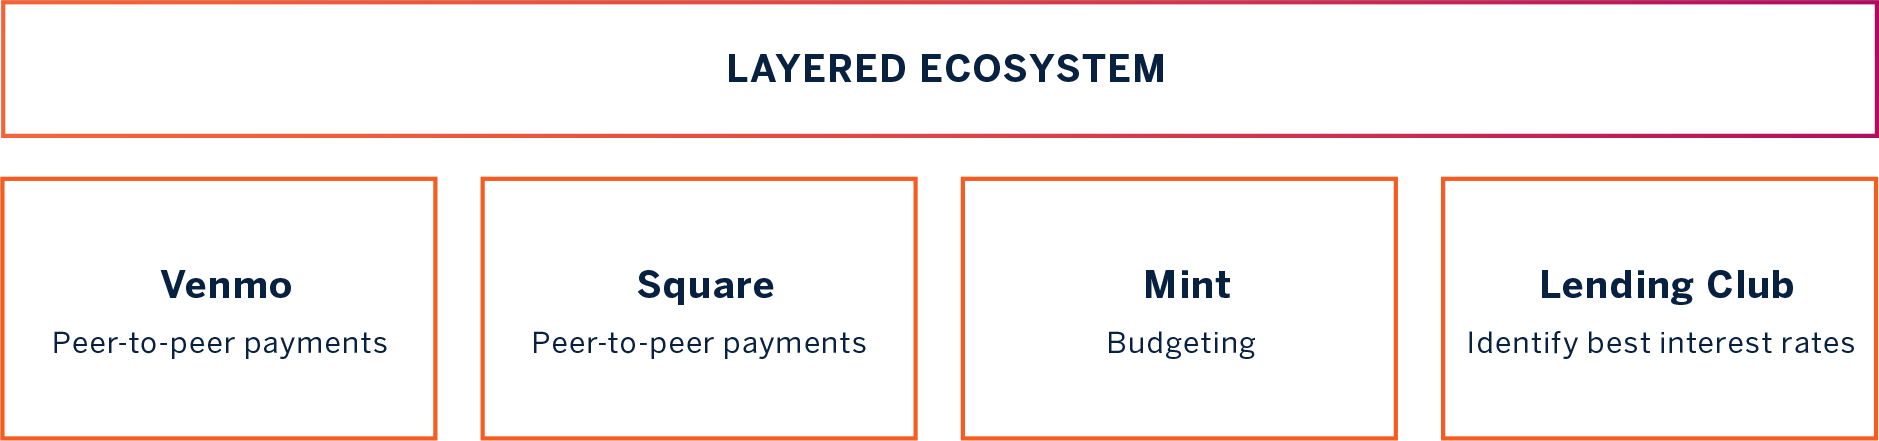 Financial Services Layered Ecosystem